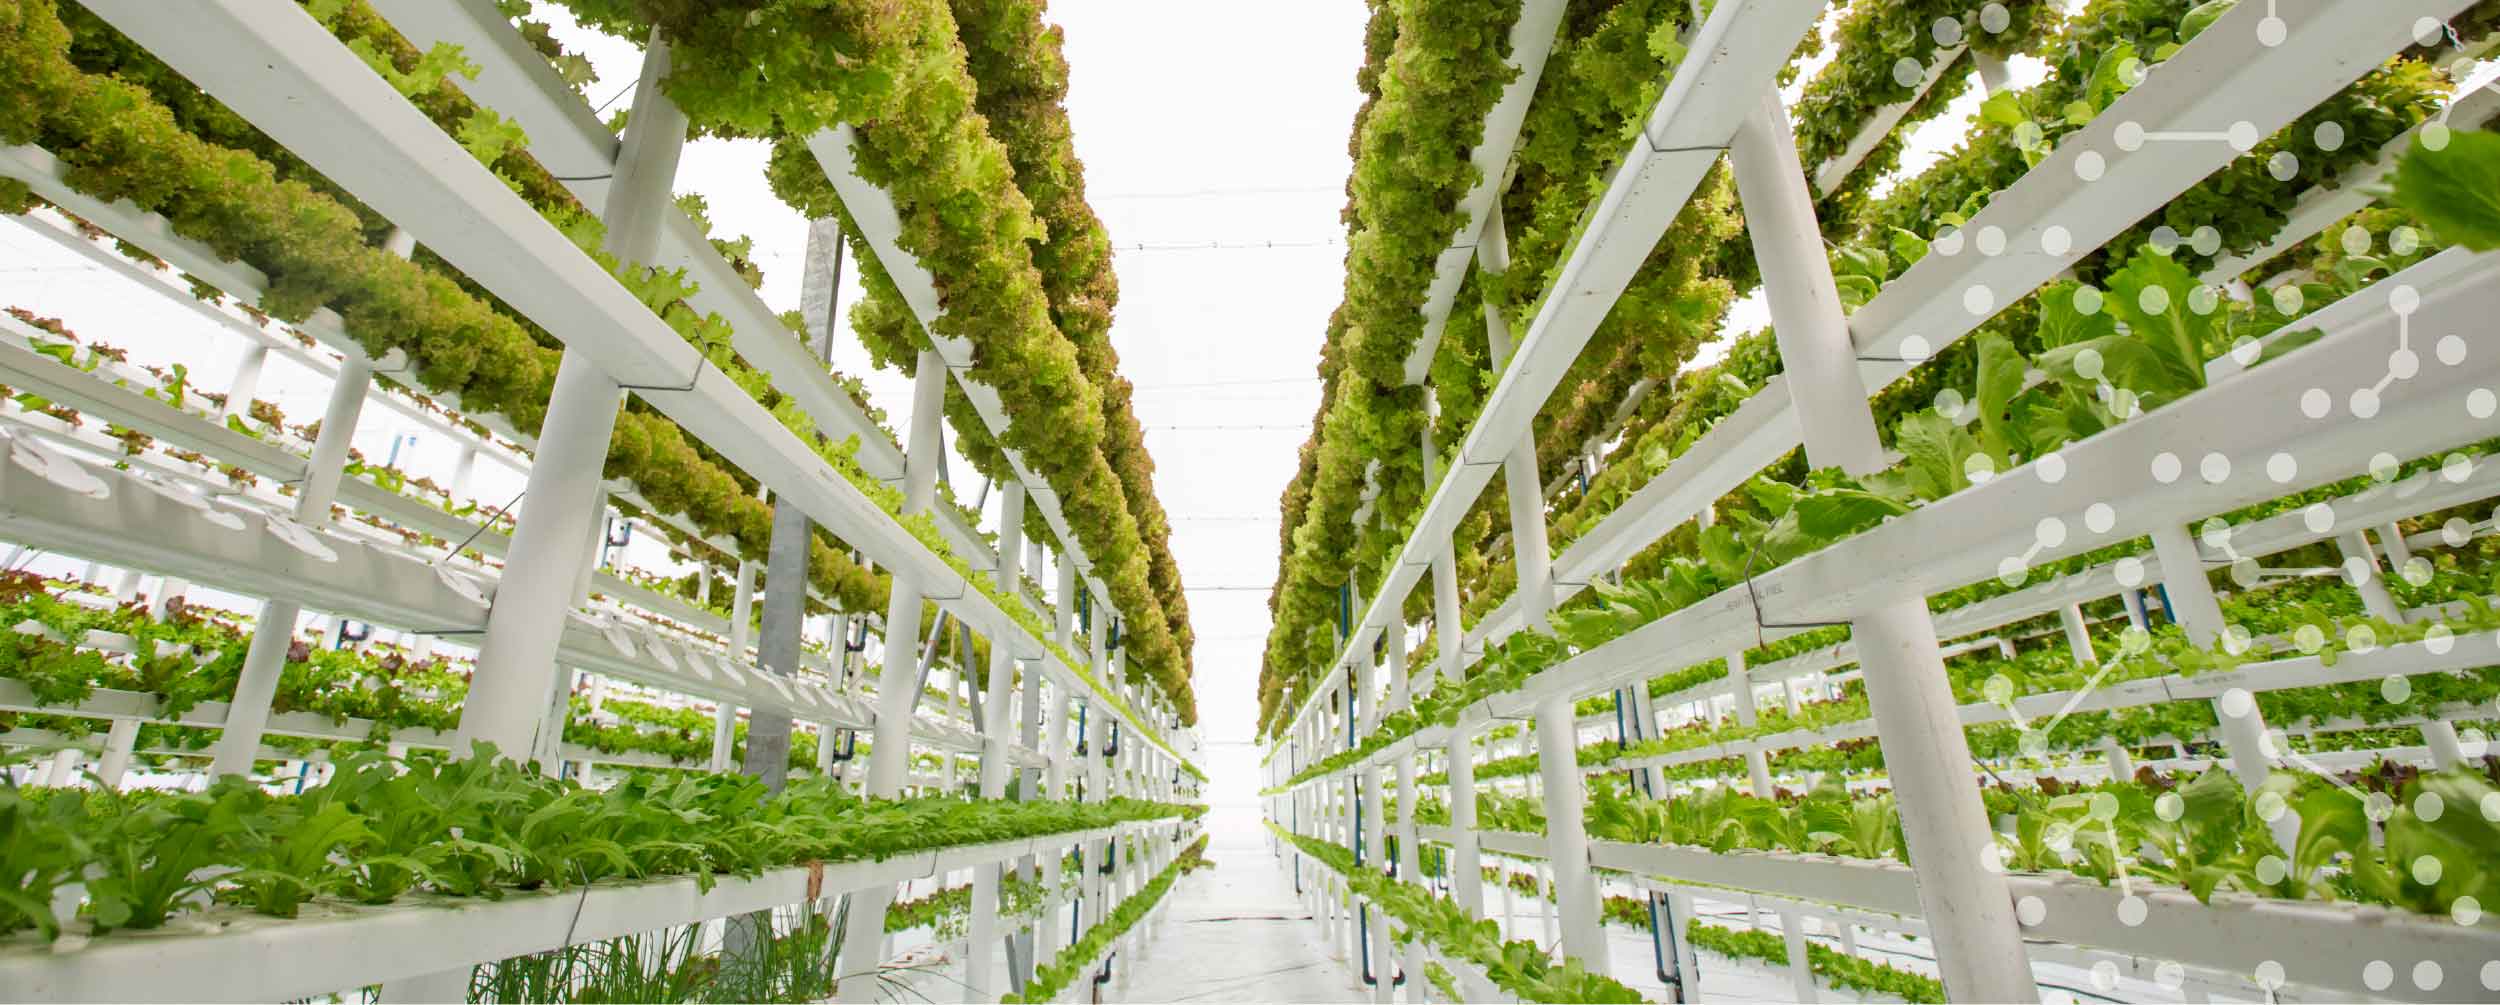 Benefits of Indoor and Vertical Farming Systems